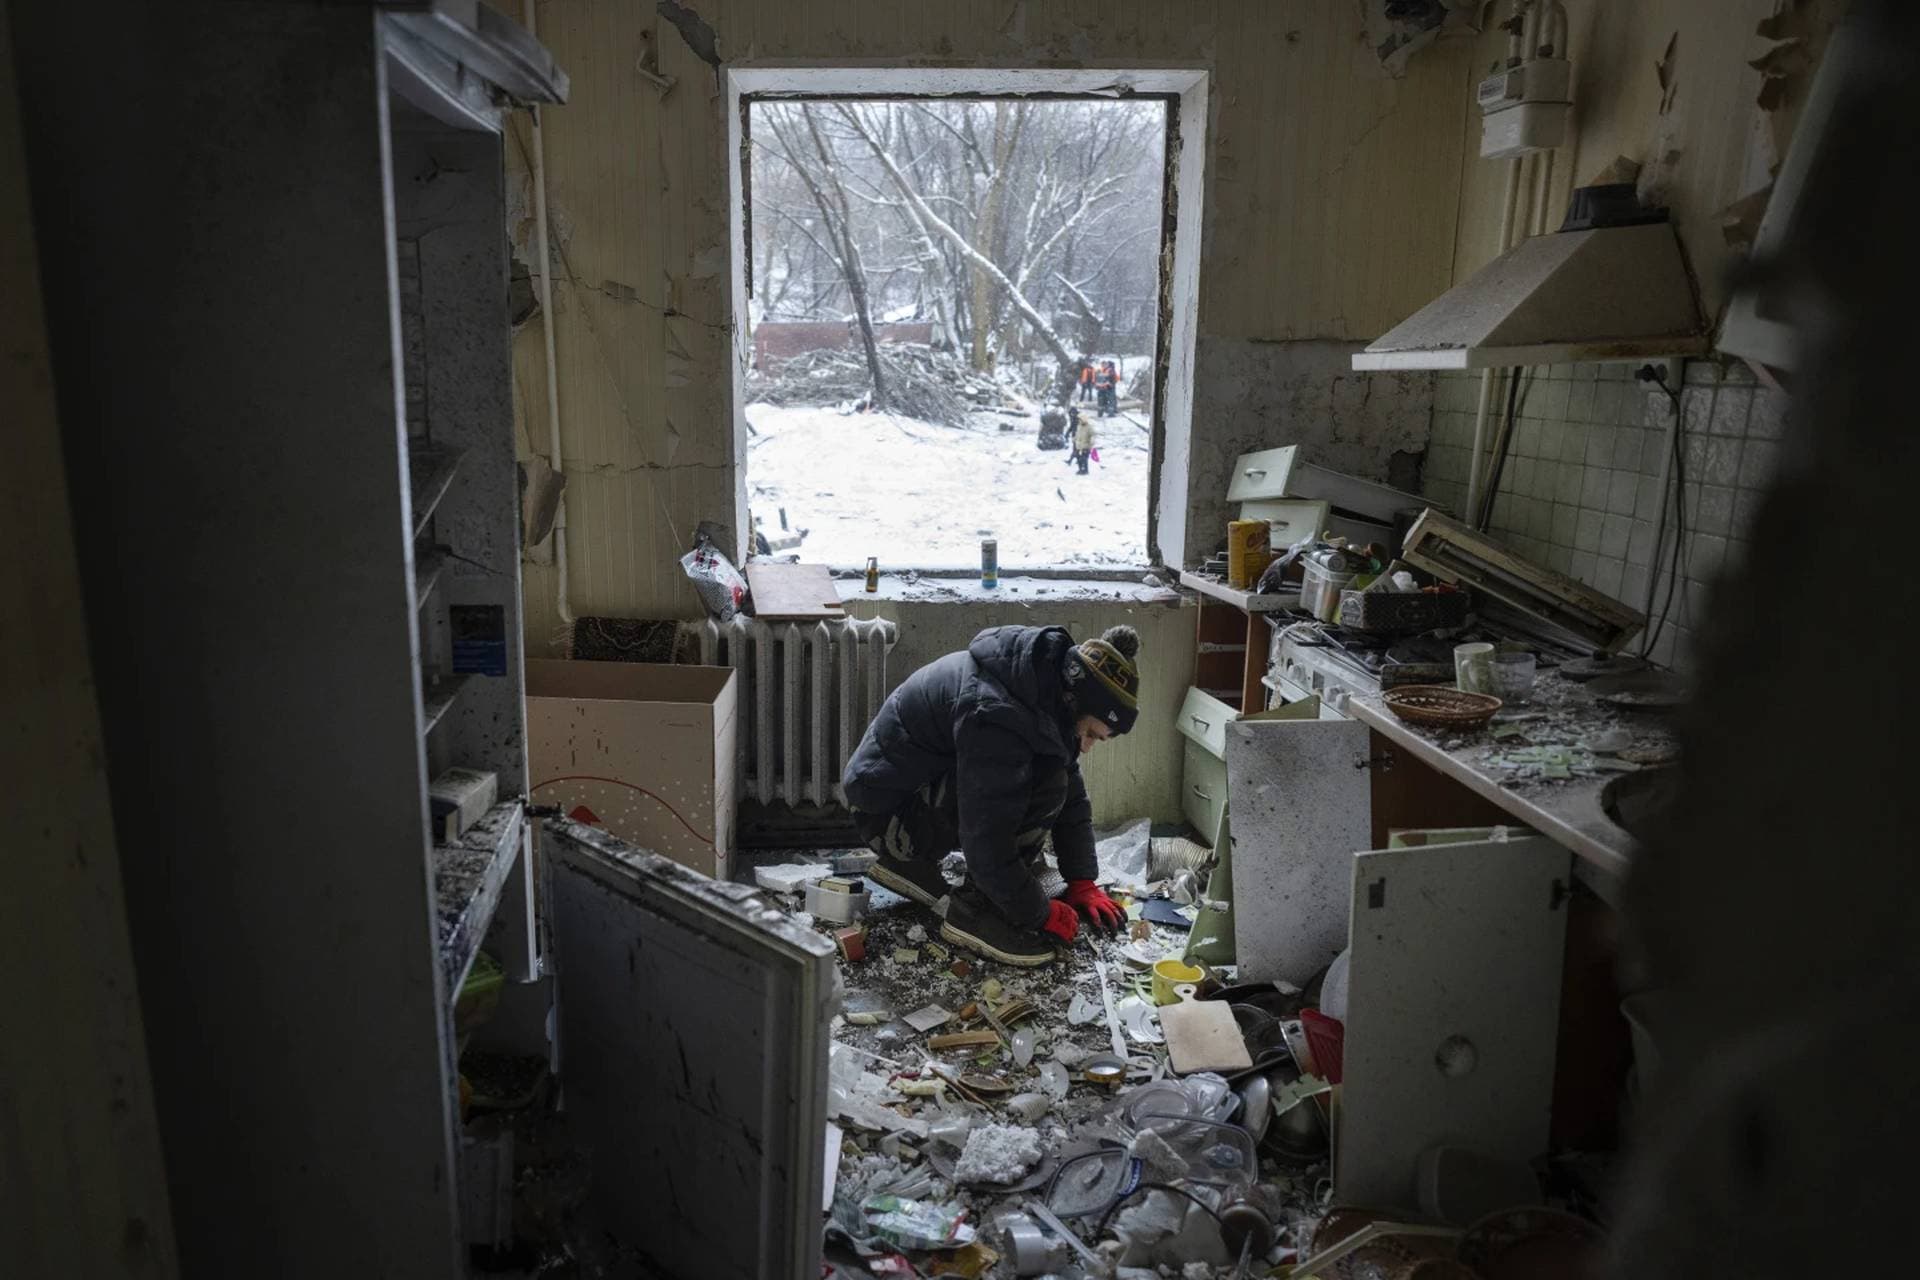 A man clears debris in his kitchen in an apartment building damaged after Tuesday’s Russian missile attack in Kyiv